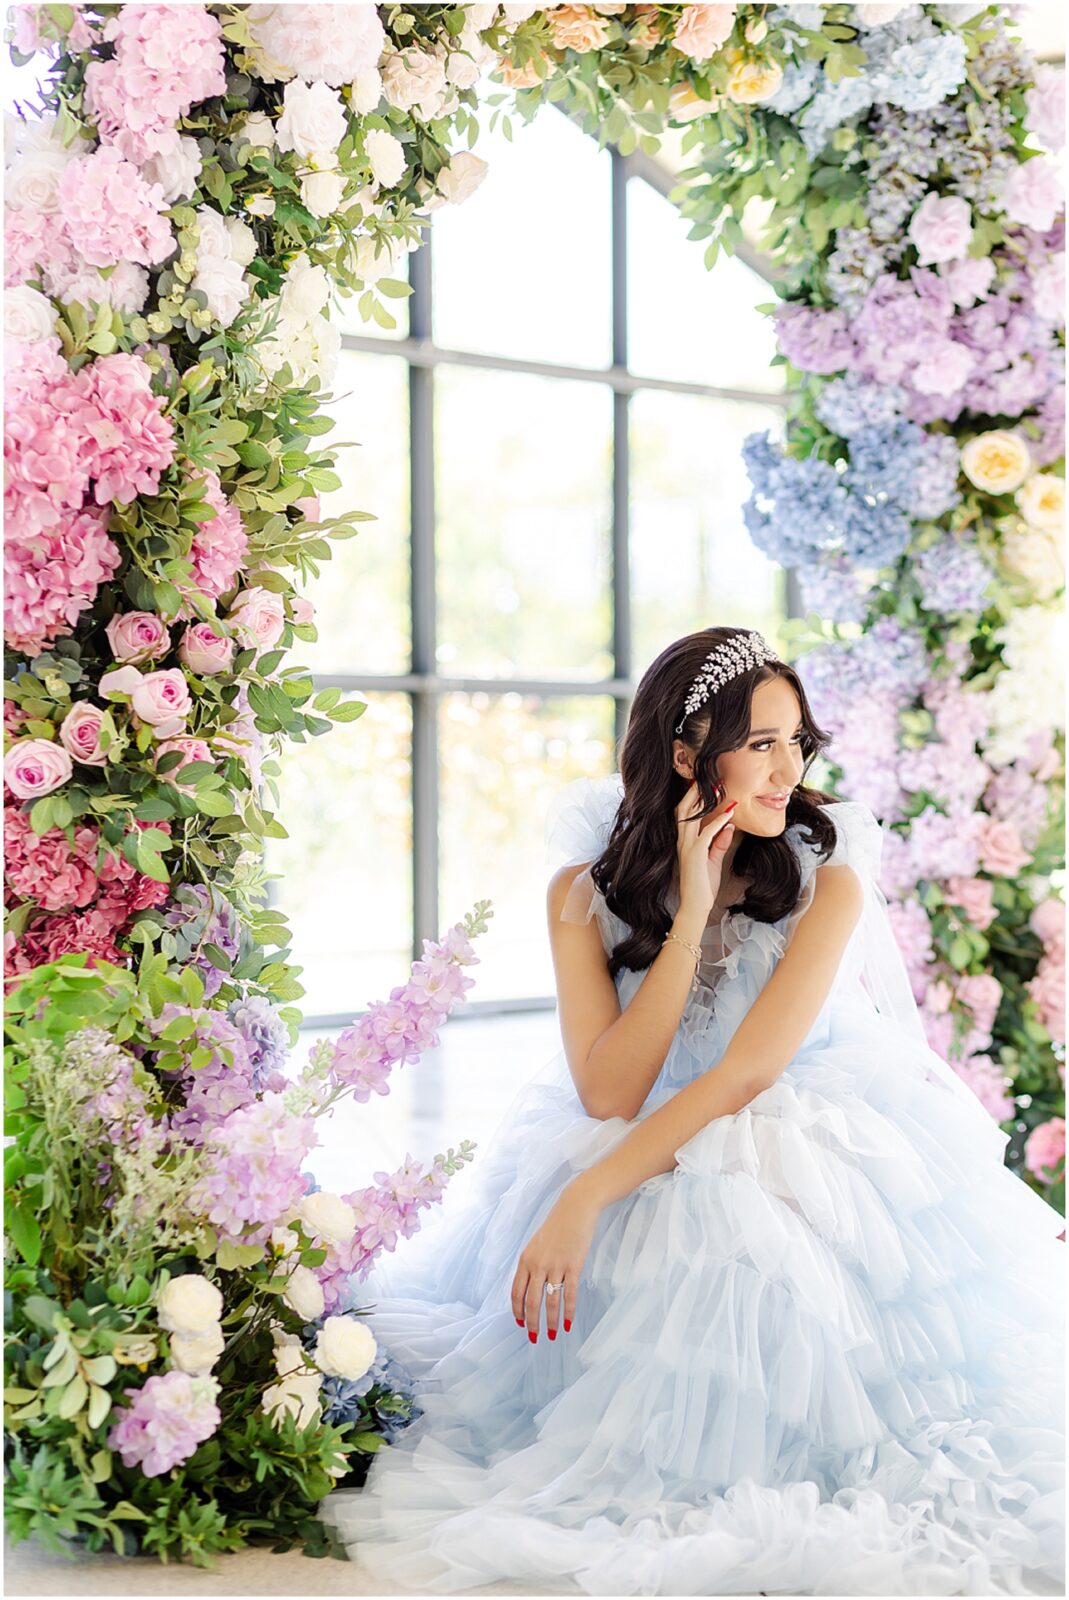 Light blue wedding dress - floral archway for wedding - gorgeous floral archway kansas city luxury wedding photographer Mariam Saifan Photography - Curated Gowns - wedding hair and makeup ideas - avent orangery - beautiful bridal photos - bridal photography - 30a florida wedding photography